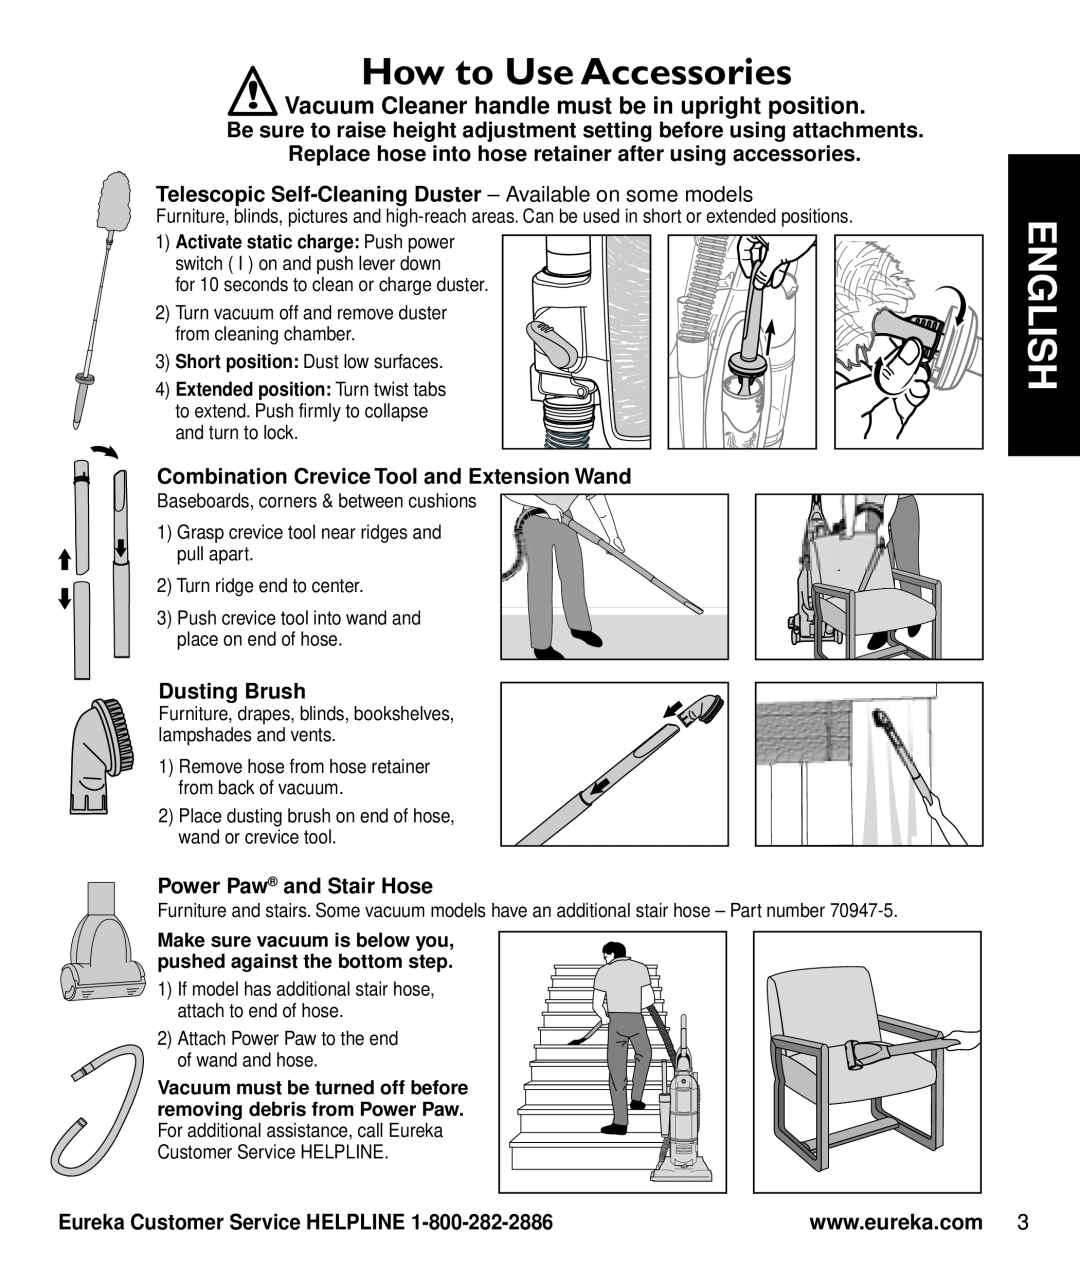 Eureka 2997-2999 Series How to Use Accessories, Vacuum Cleaner handle must be in upright position, Dusting Brush, English 